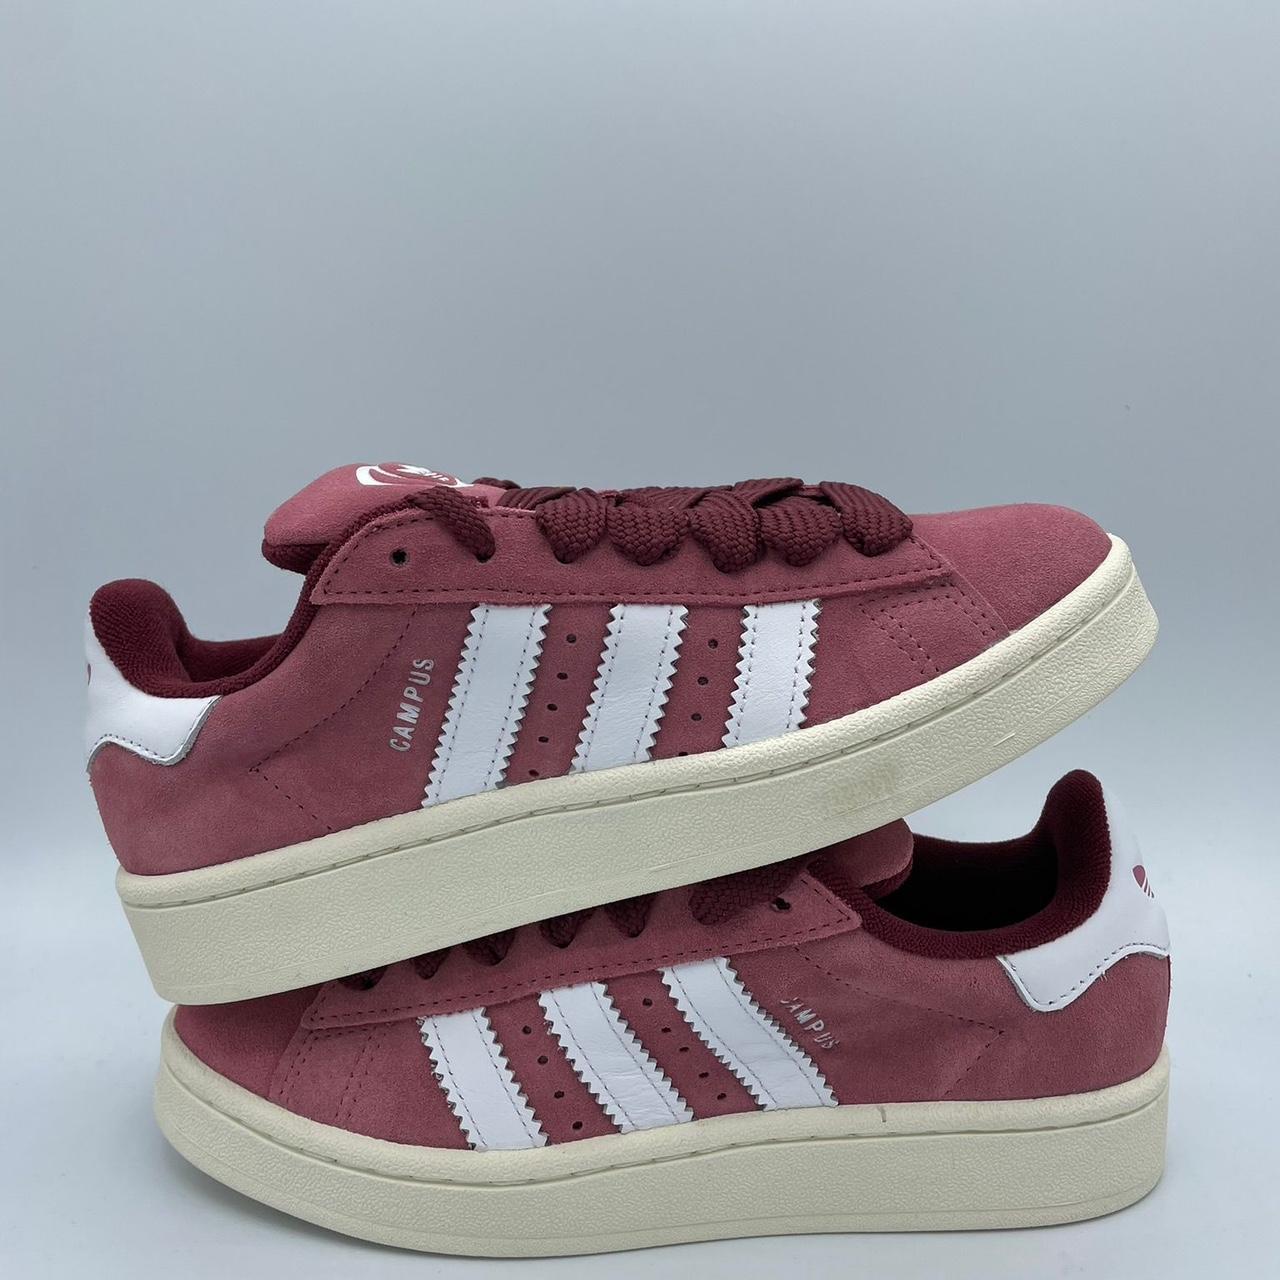 Adidas Women's Burgundy and Pink Trainers | Depop